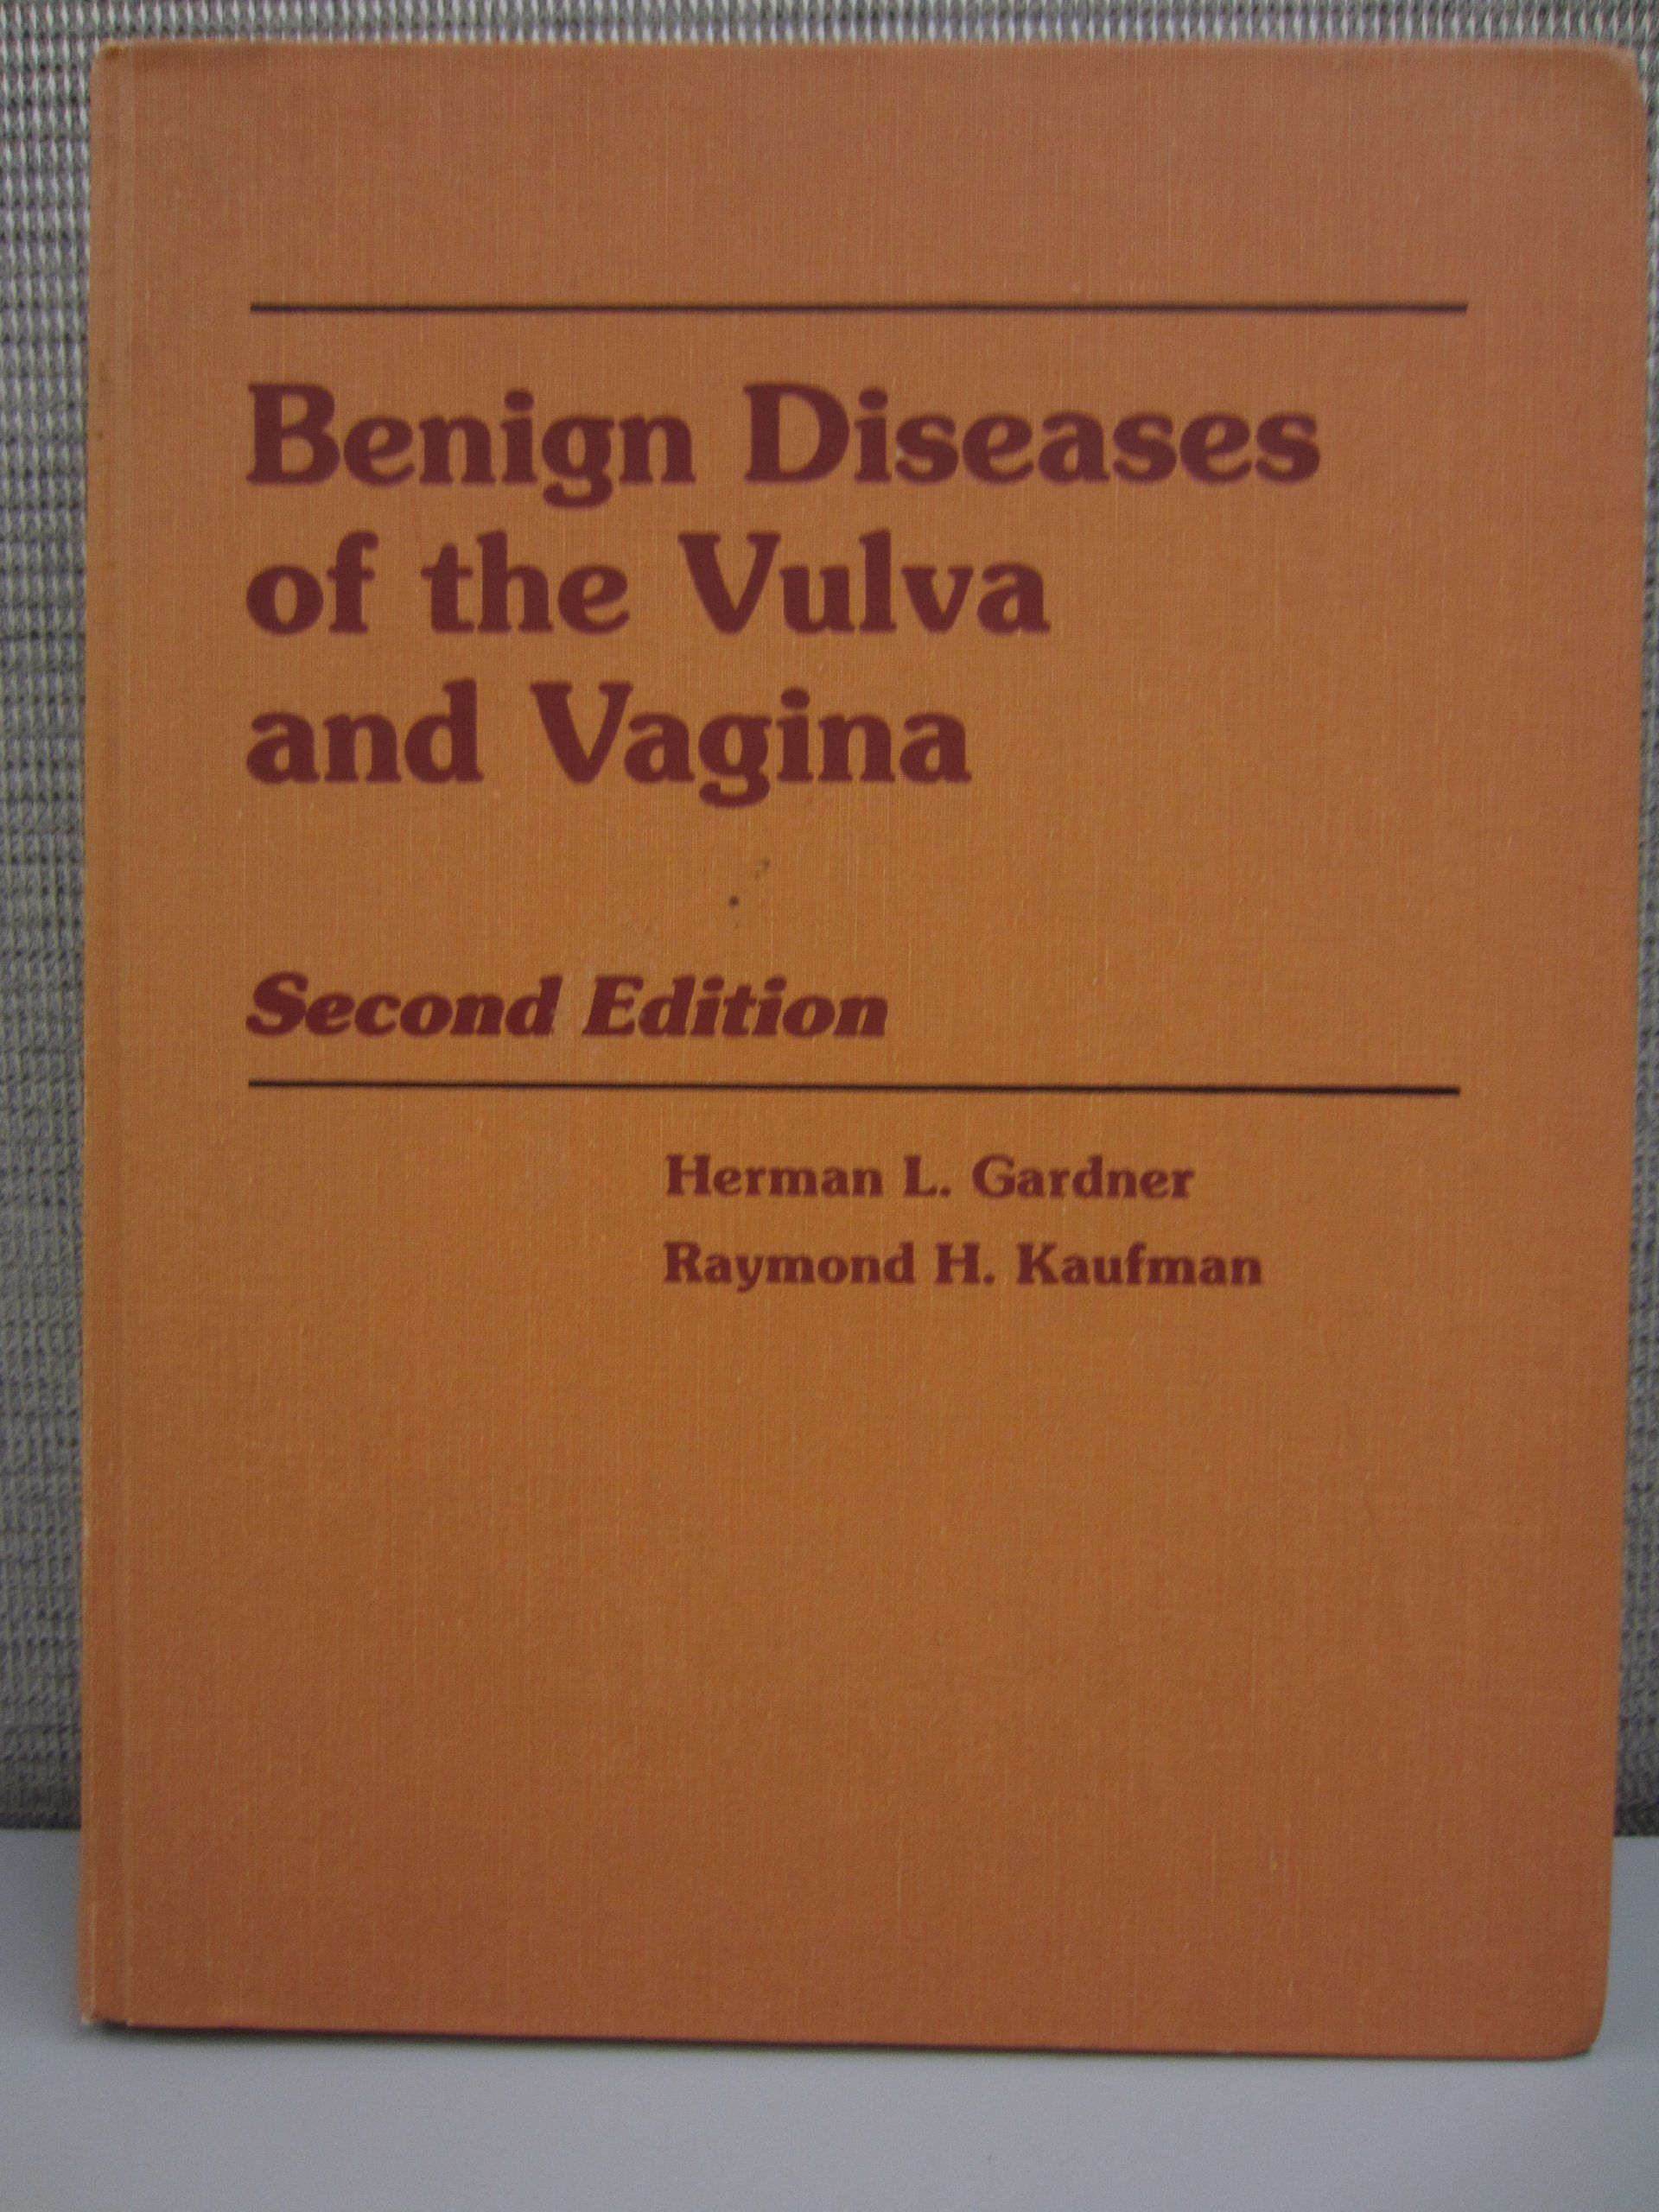 best of Of Benign the vagina and diseases vulva